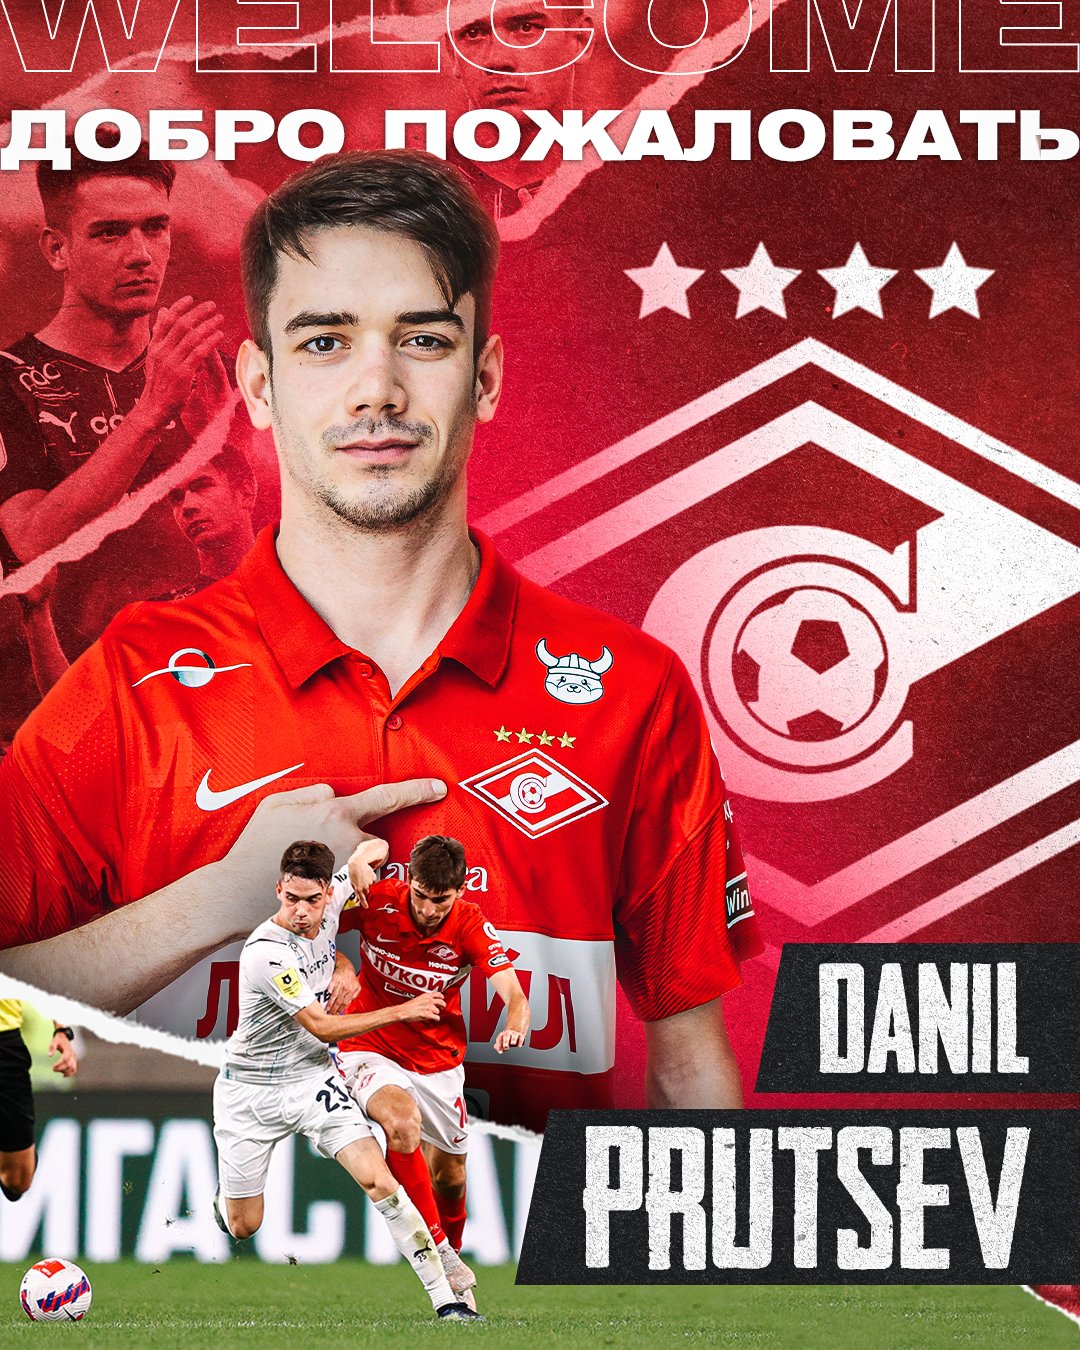 FC Spartak Moscow on X: ⚡️ 𝐖𝐞𝐥𝐜𝐨𝐦𝐞 𝐭𝐨 𝐒𝐩𝐚𝐫𝐭𝐚𝐤, 𝐃𝐚𝐧𝐢𝐥  𝐏𝐫𝐮𝐭𝐬𝐞𝐯! We are pleased to announce the signing of Russian youth  international midfielder Danil Prutsev on a long term deal. He becomes